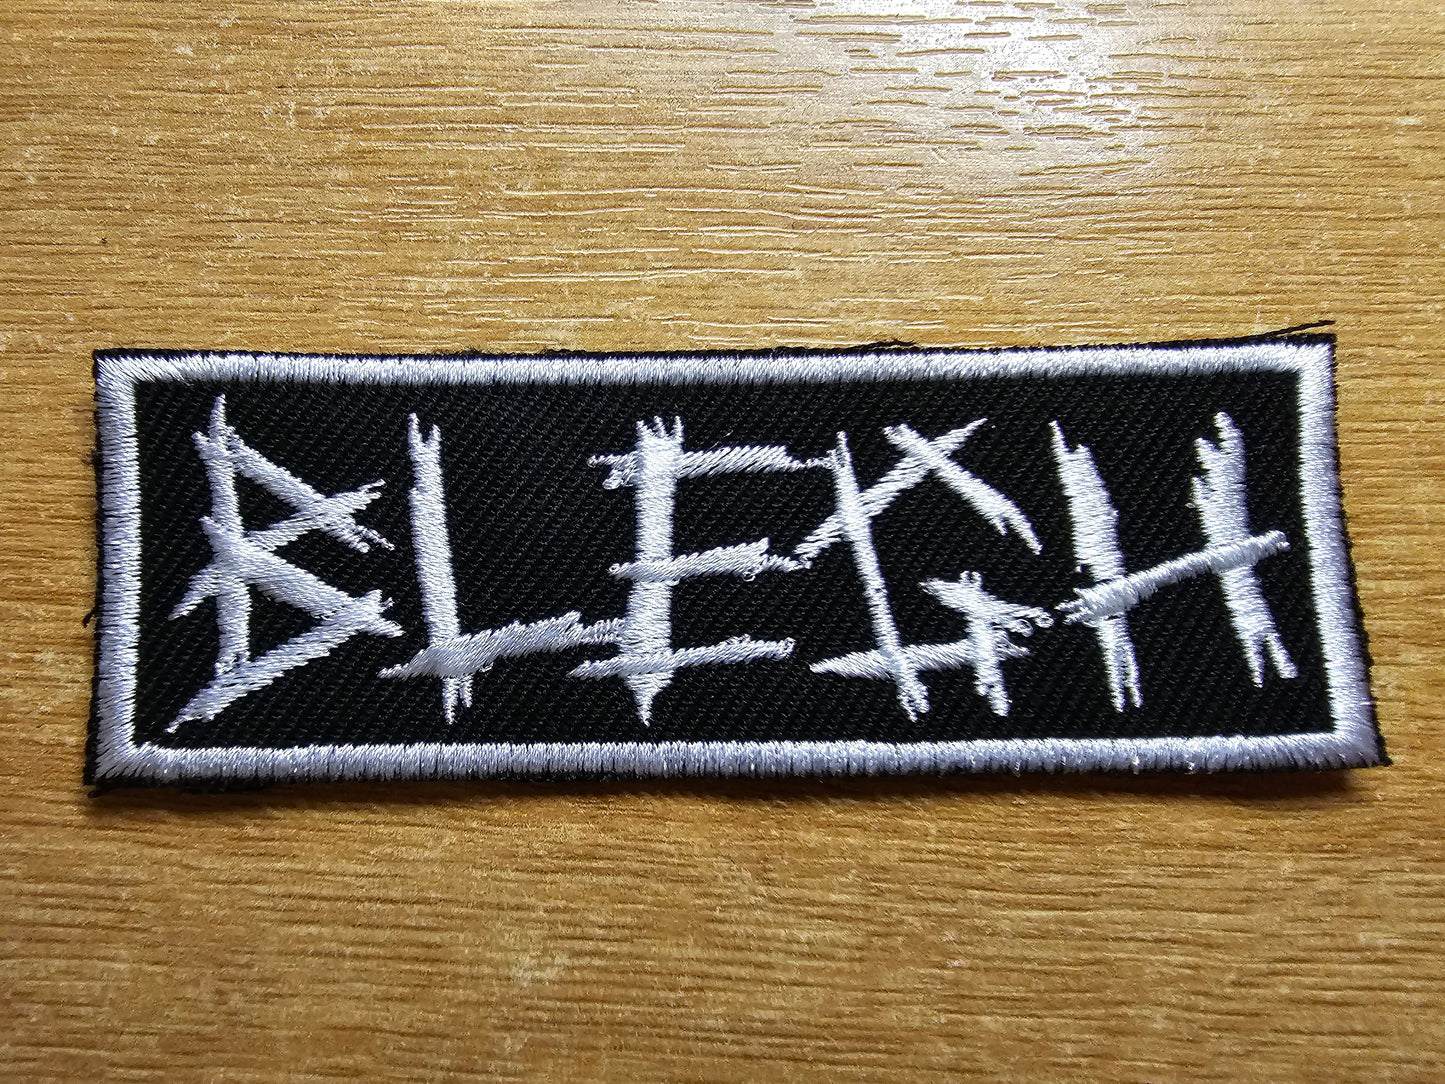 Blegh Metalcore Embroidered Patch Smaller Metal Breakdown Emo